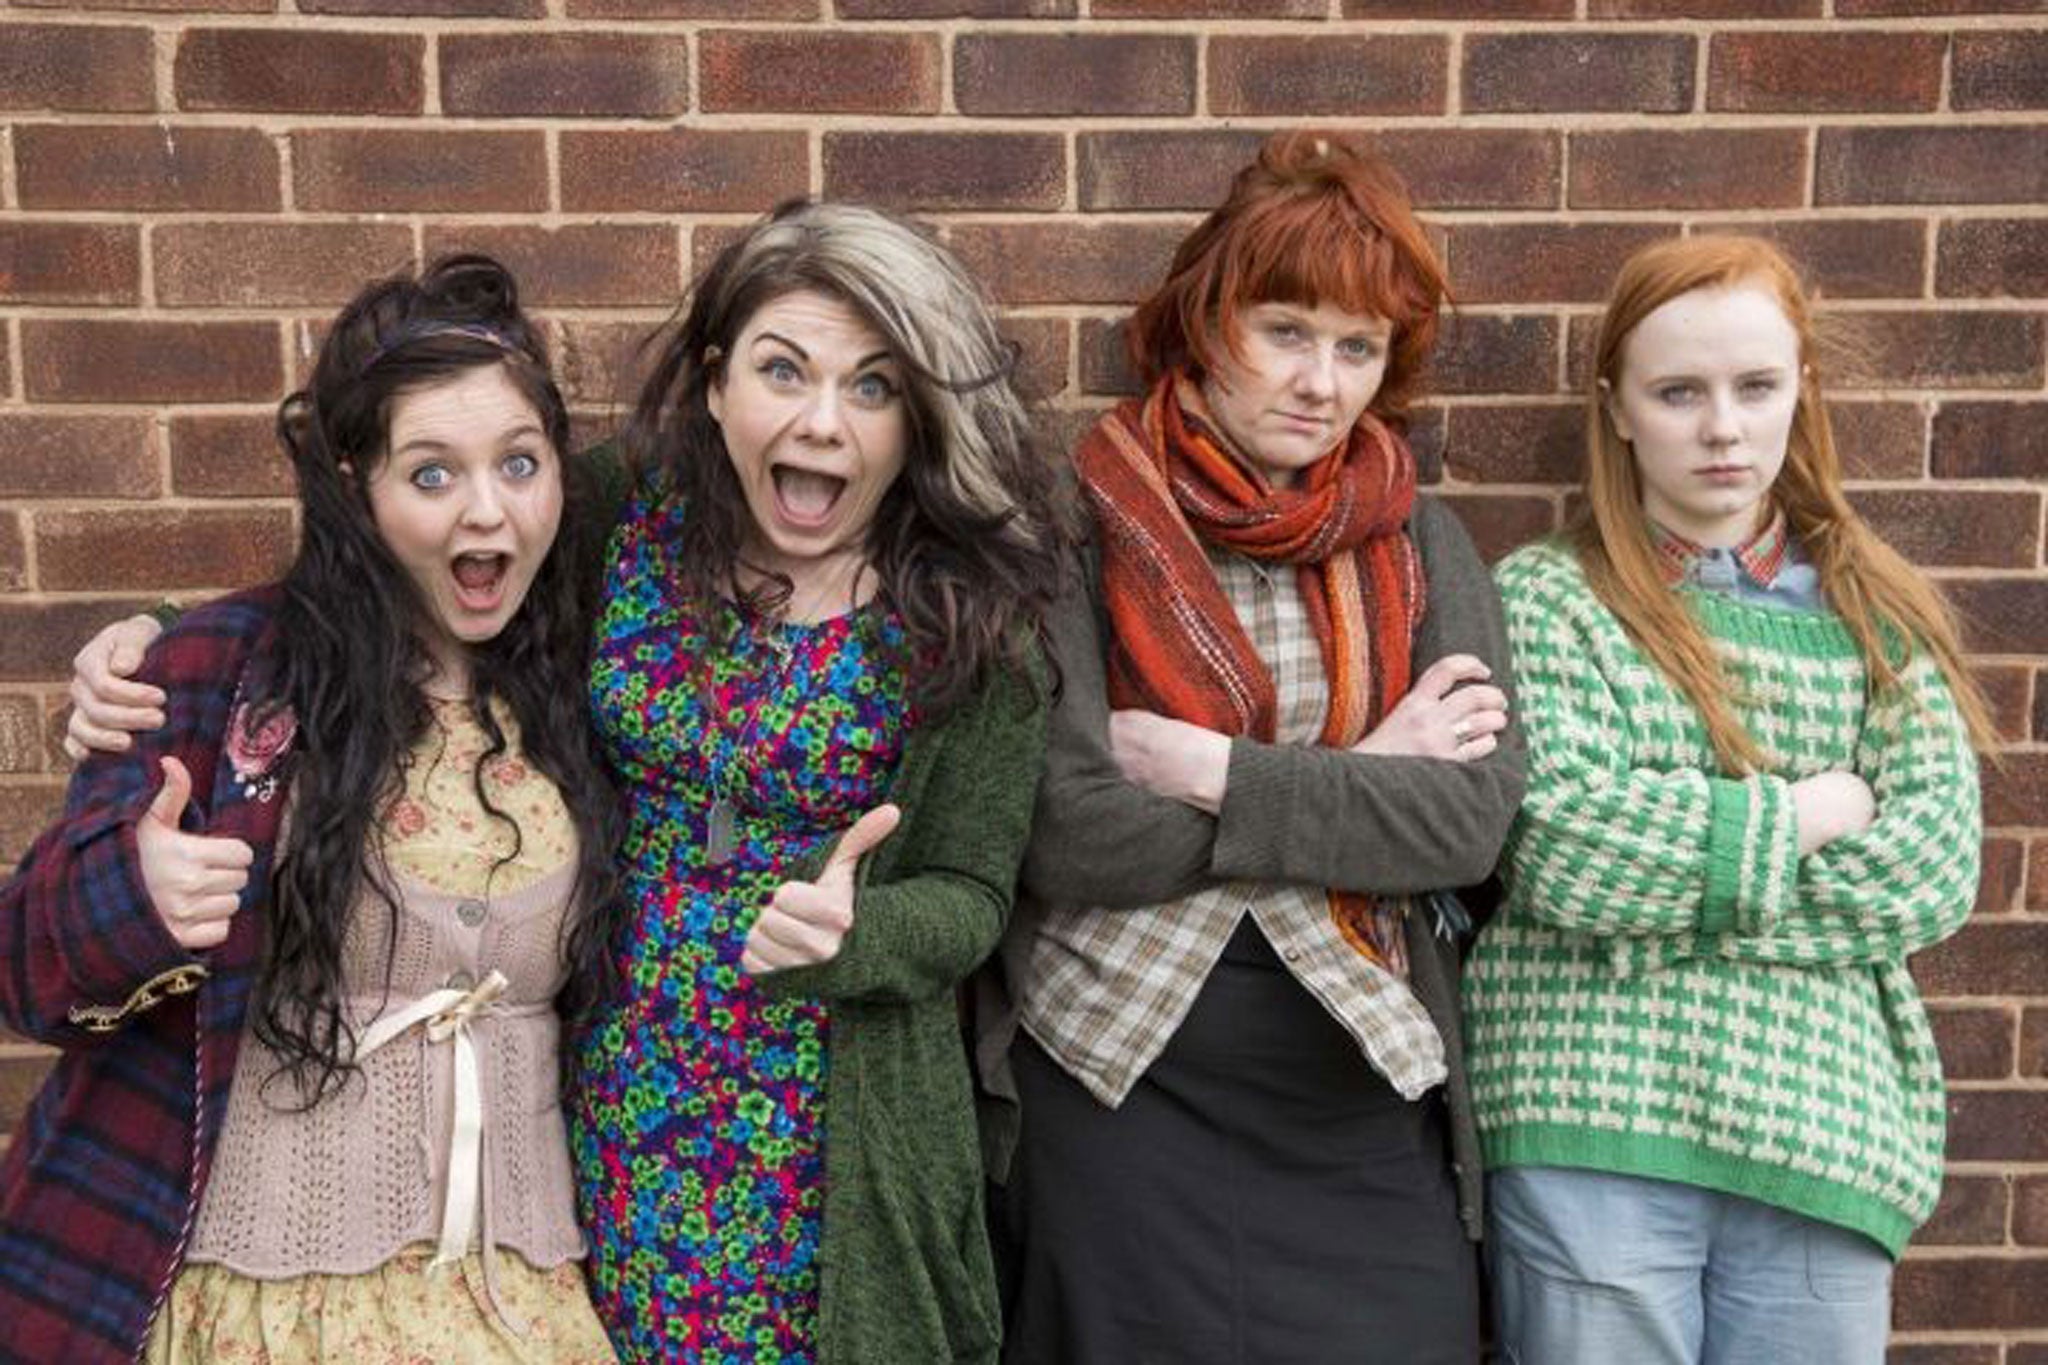 Nostalgic warmth: Caitlin Moran's series Raised By Wolves starts on Channel 4 in January